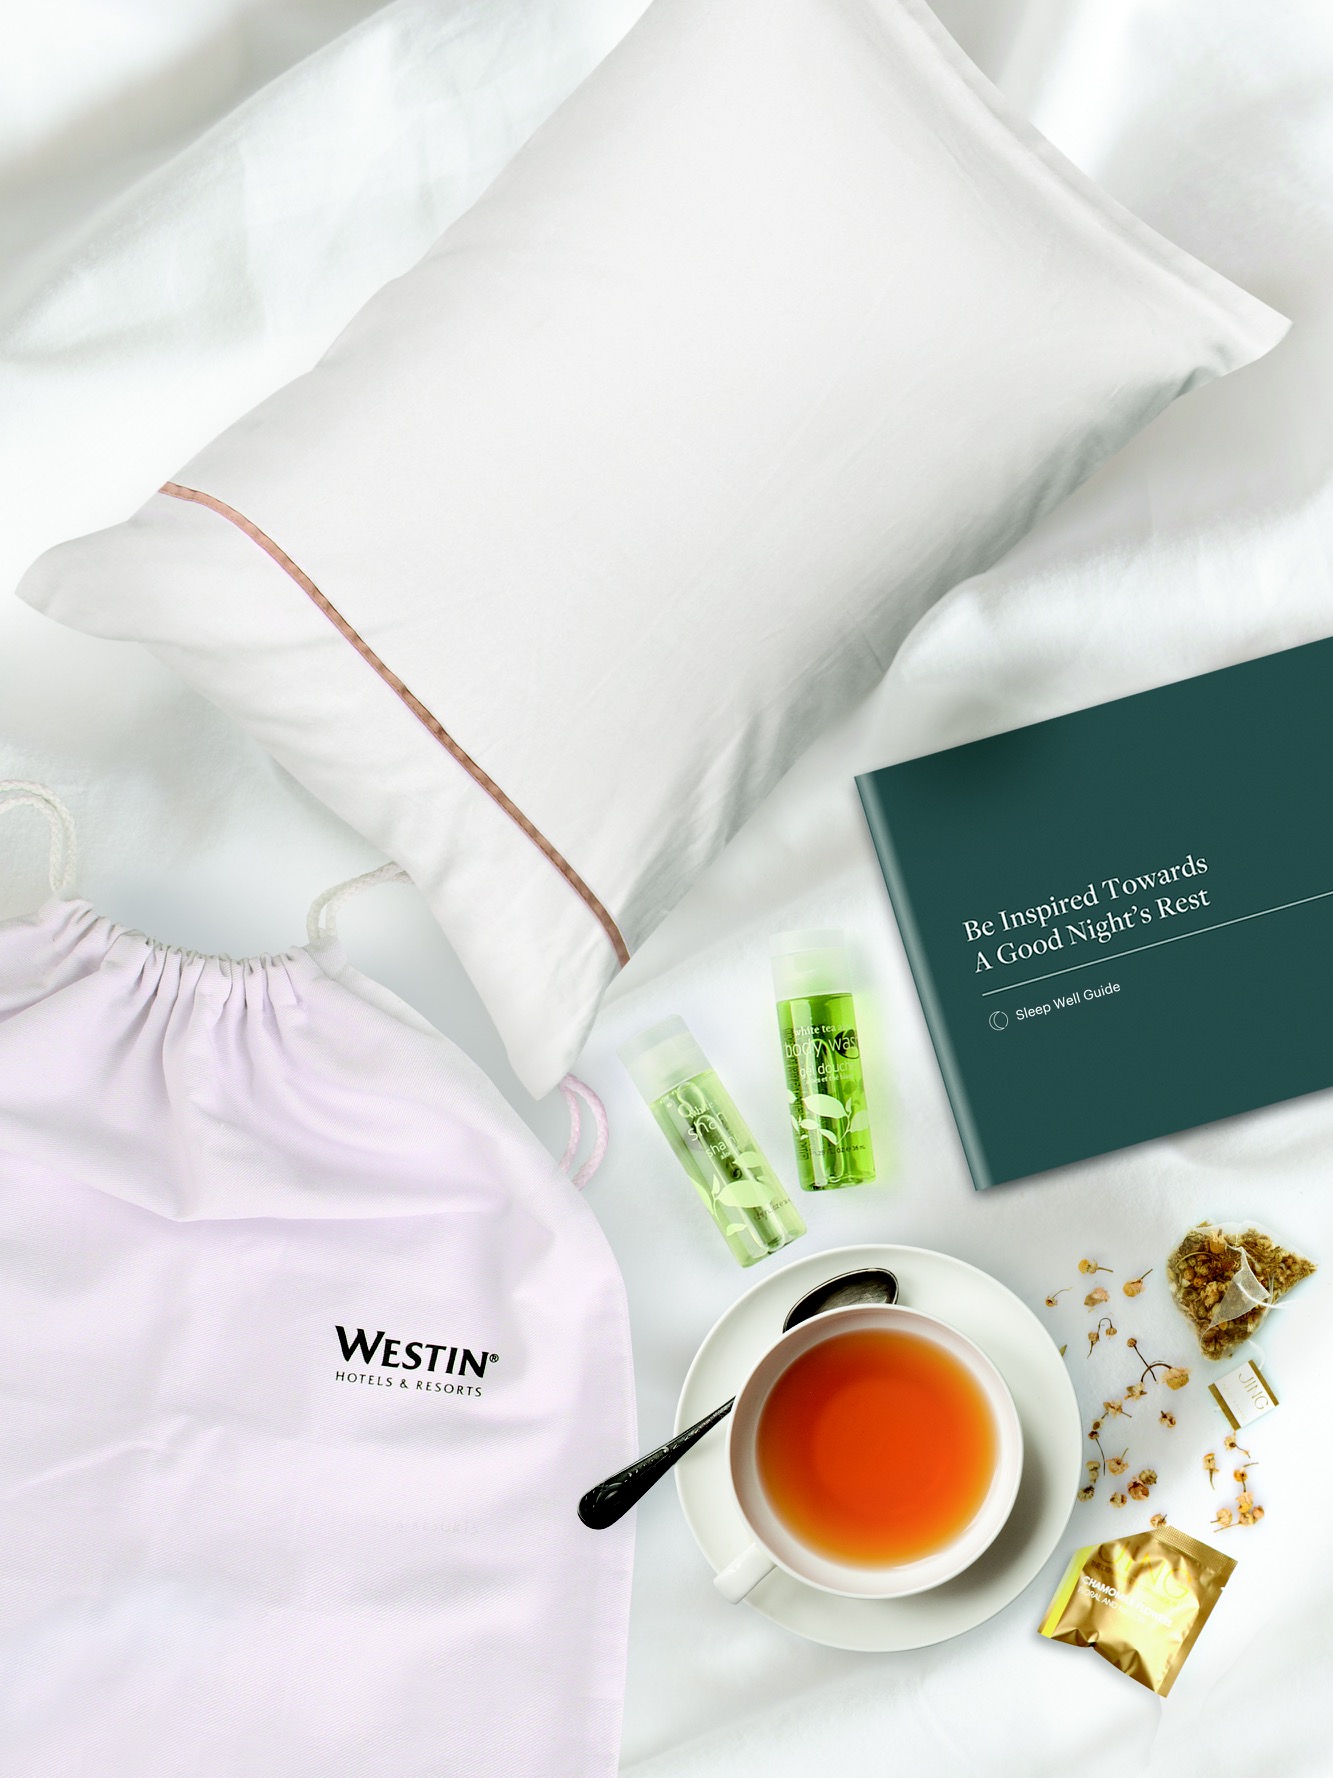 Specially customised 'Sleep Kits' by Westin Hotels & Resorts in celebration of World Sleep Day in Asia Pacific